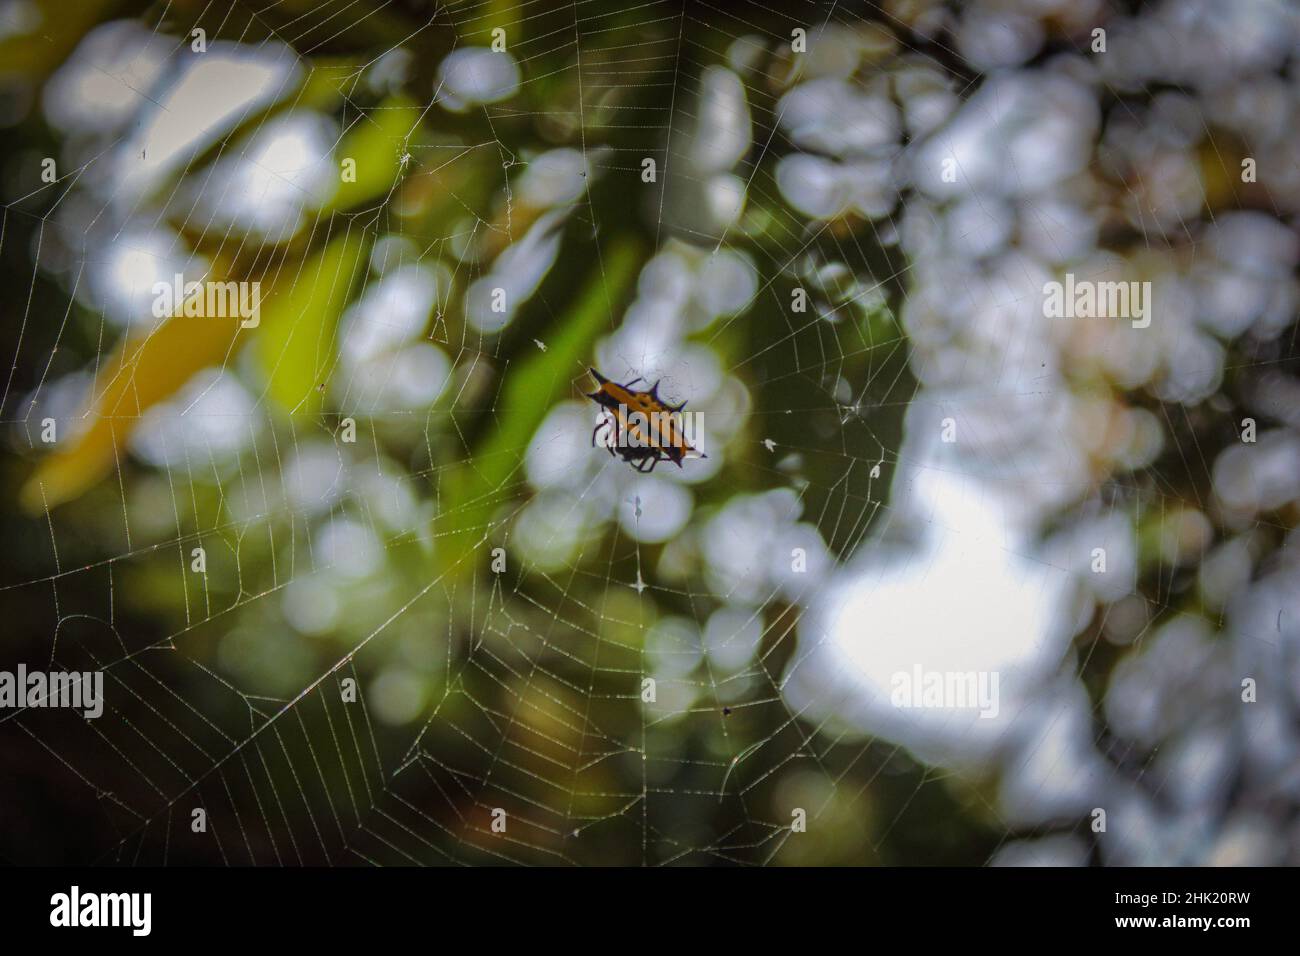 A crab spider or spinybacked orb-weaver (gasteracantha cancriformis) waiting in her web. The picture was taken at Ialibu, SHP, Papua New Guinea (PNG). Stock Photo